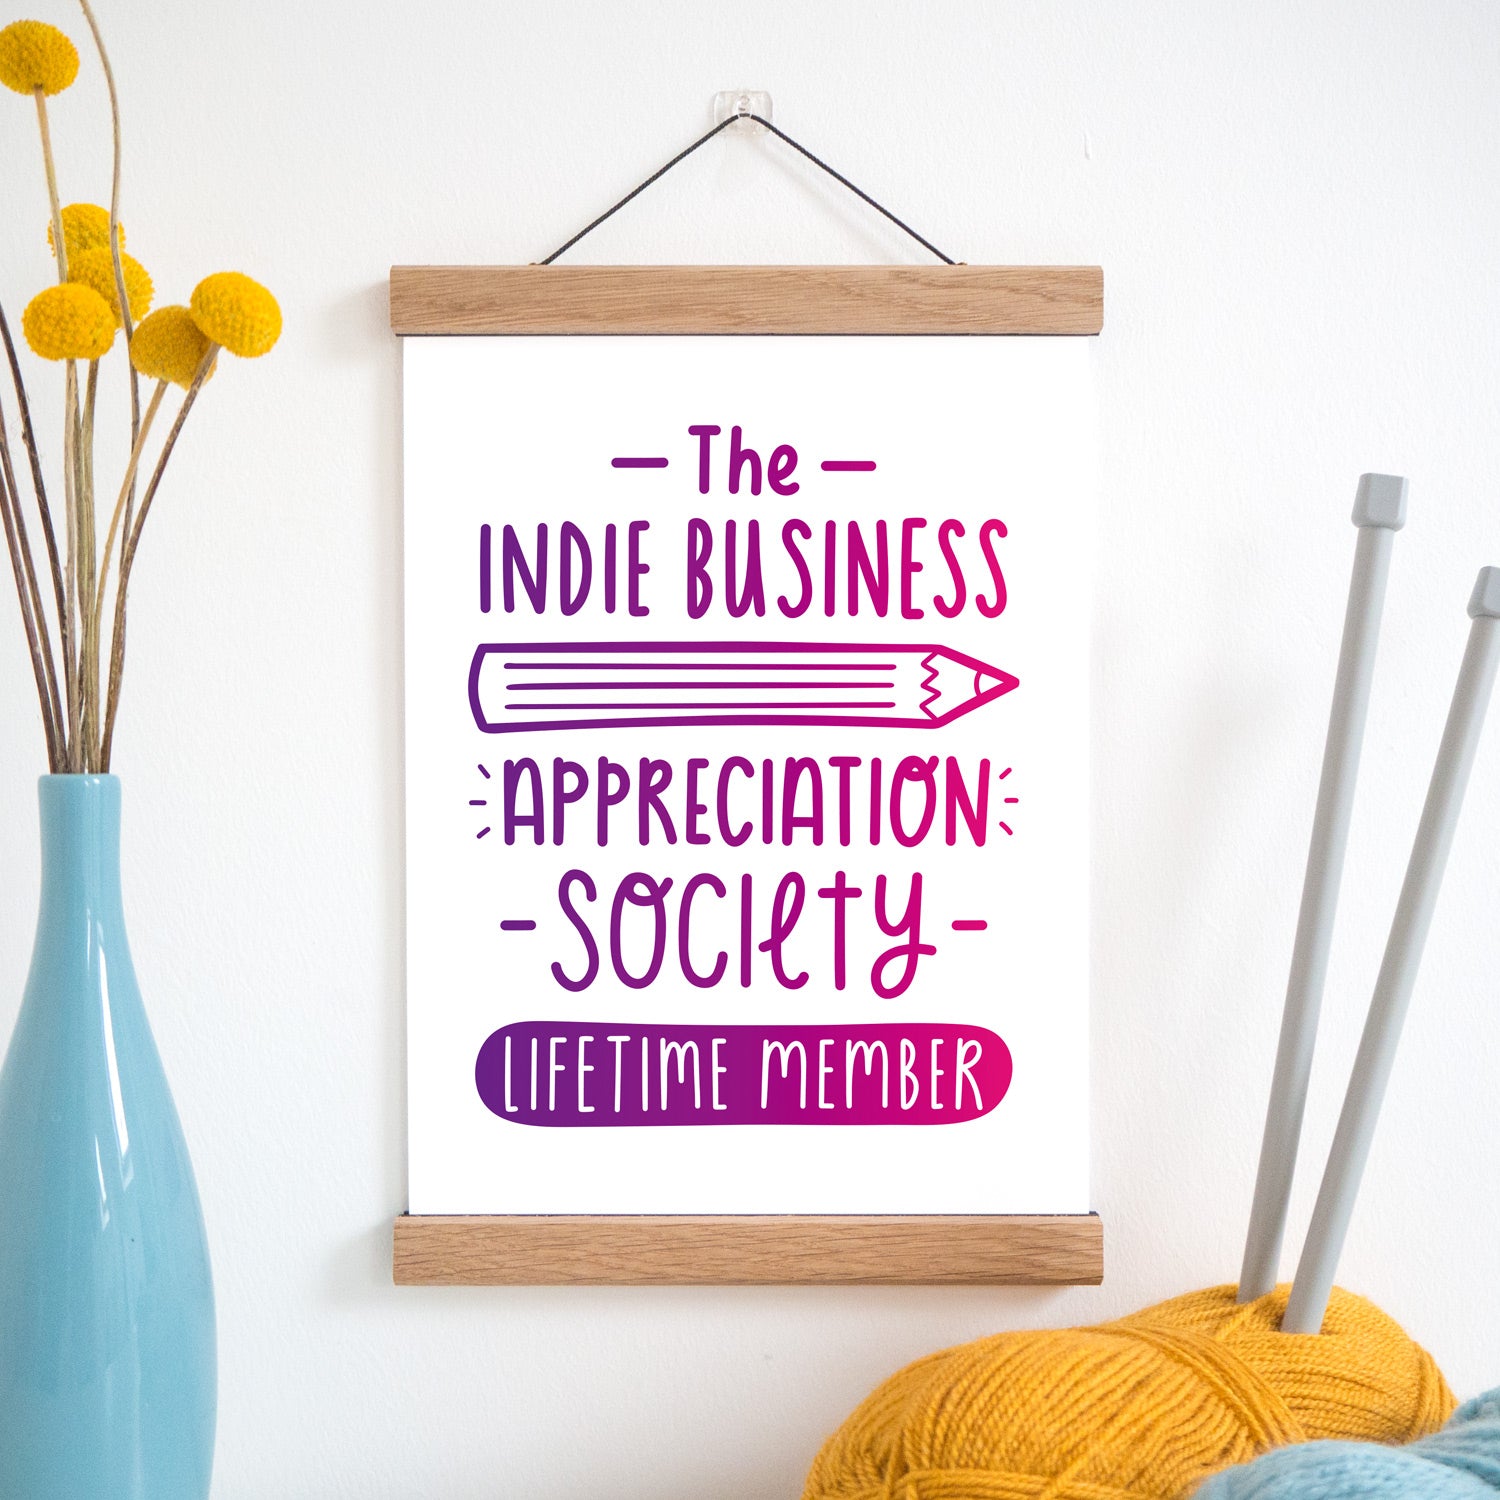 The indie business appreciation society print in pink and purple ombre and held in a magnetic frame next to a vase of yellow flowers and wool with knitting needles.